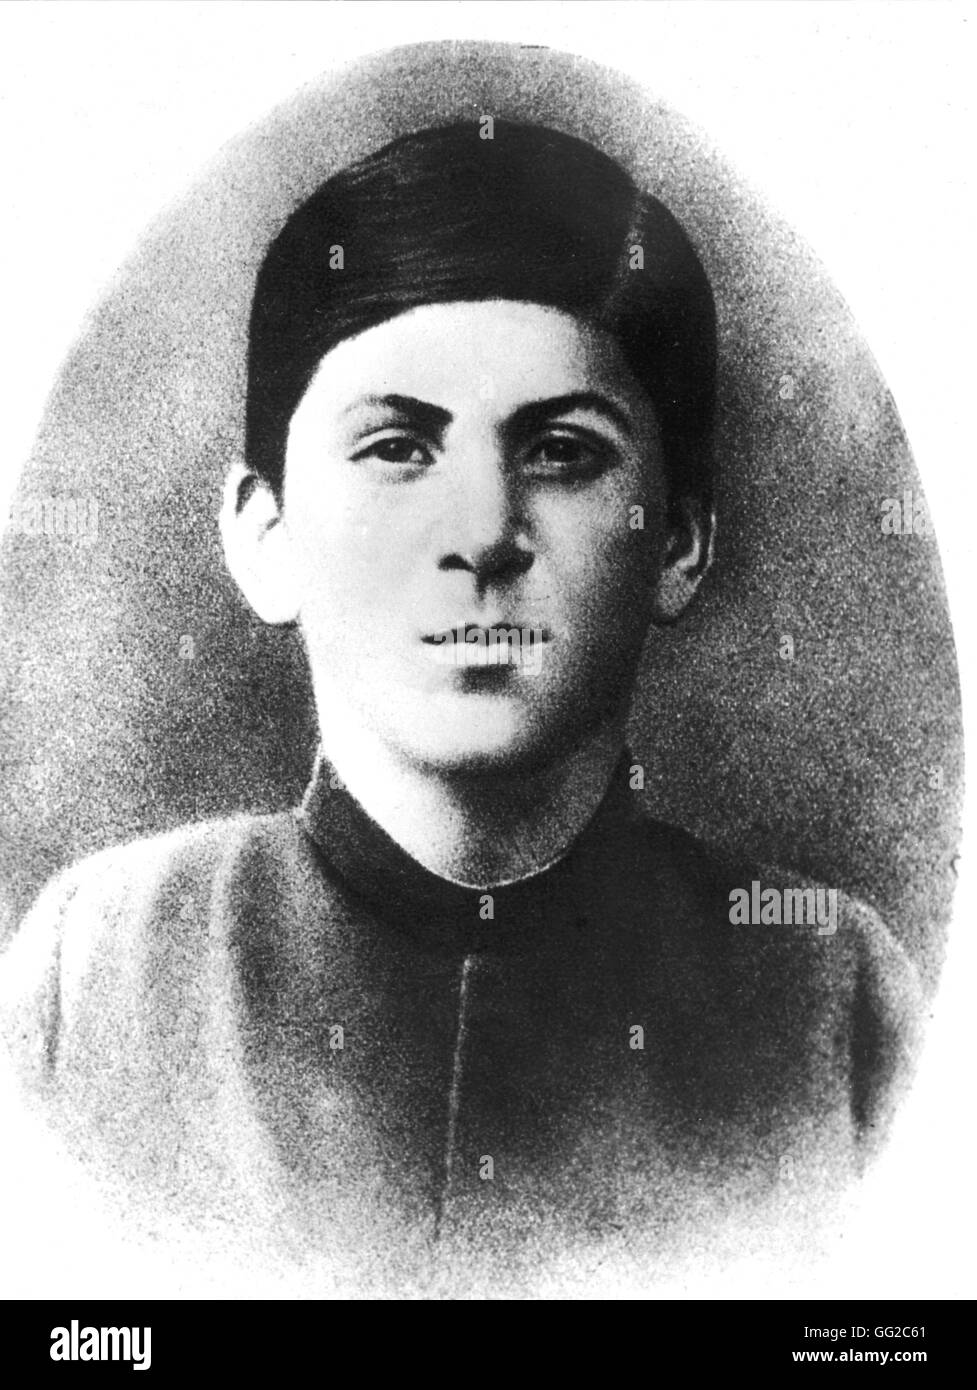 Stalin during his years at the seminary 19th century Russia Stock Photo